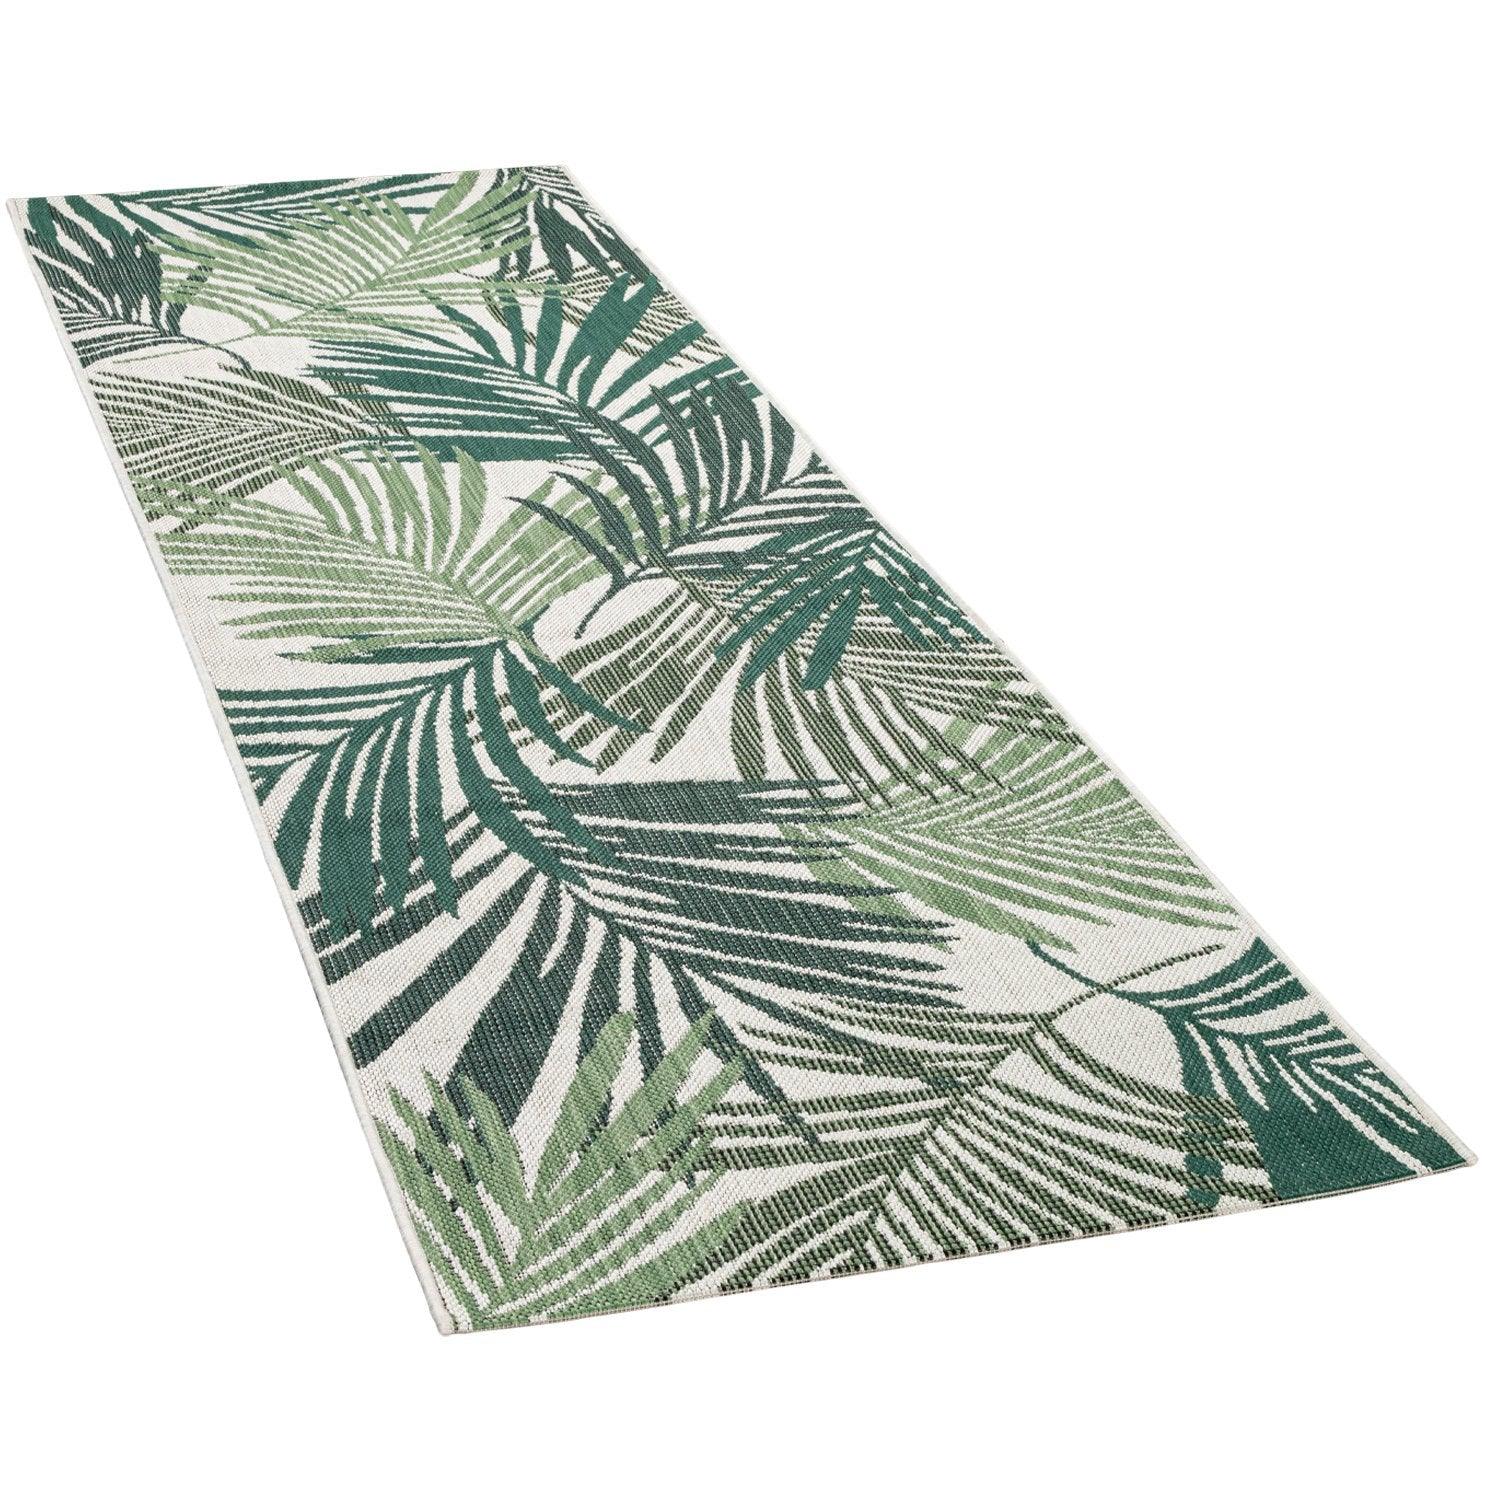 Paco Home Indoor & Outdoor Rug - Jungle Design with Green Palm Trees Green  4'7 x 6'7 4' x 6' Runner, Outdoor, Indoor Living Room, Patio Rectangle 